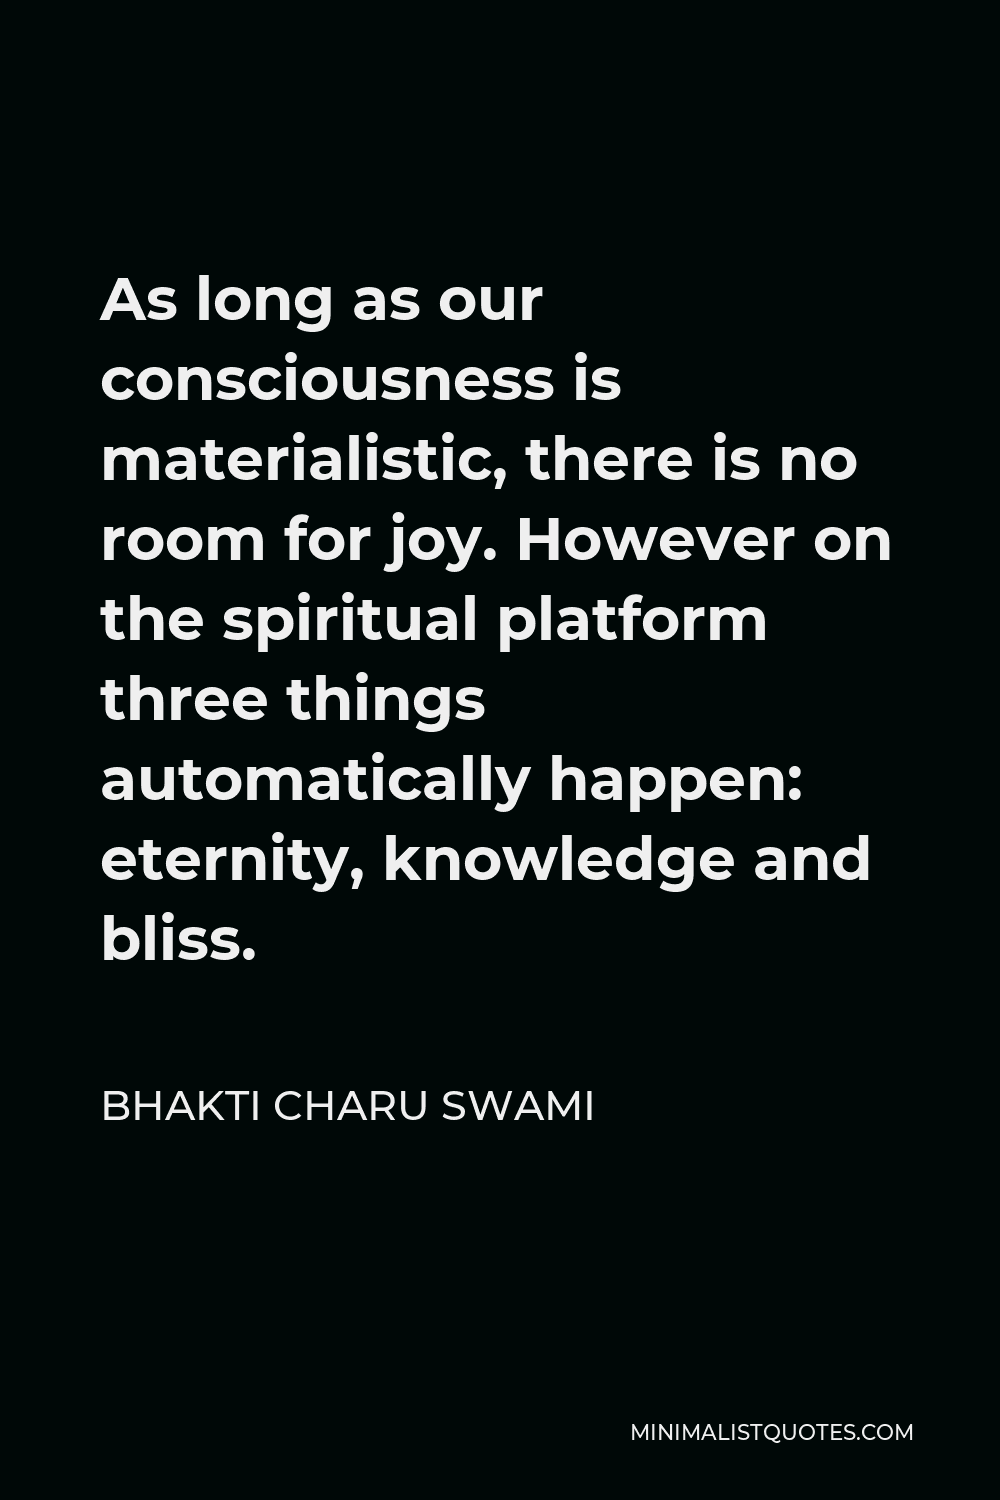 Bhakti Charu Swami Quote - As long as our consciousness is materialistic, there is no room for joy. However on the spiritual platform three things automatically happen: eternity, knowledge and bliss.